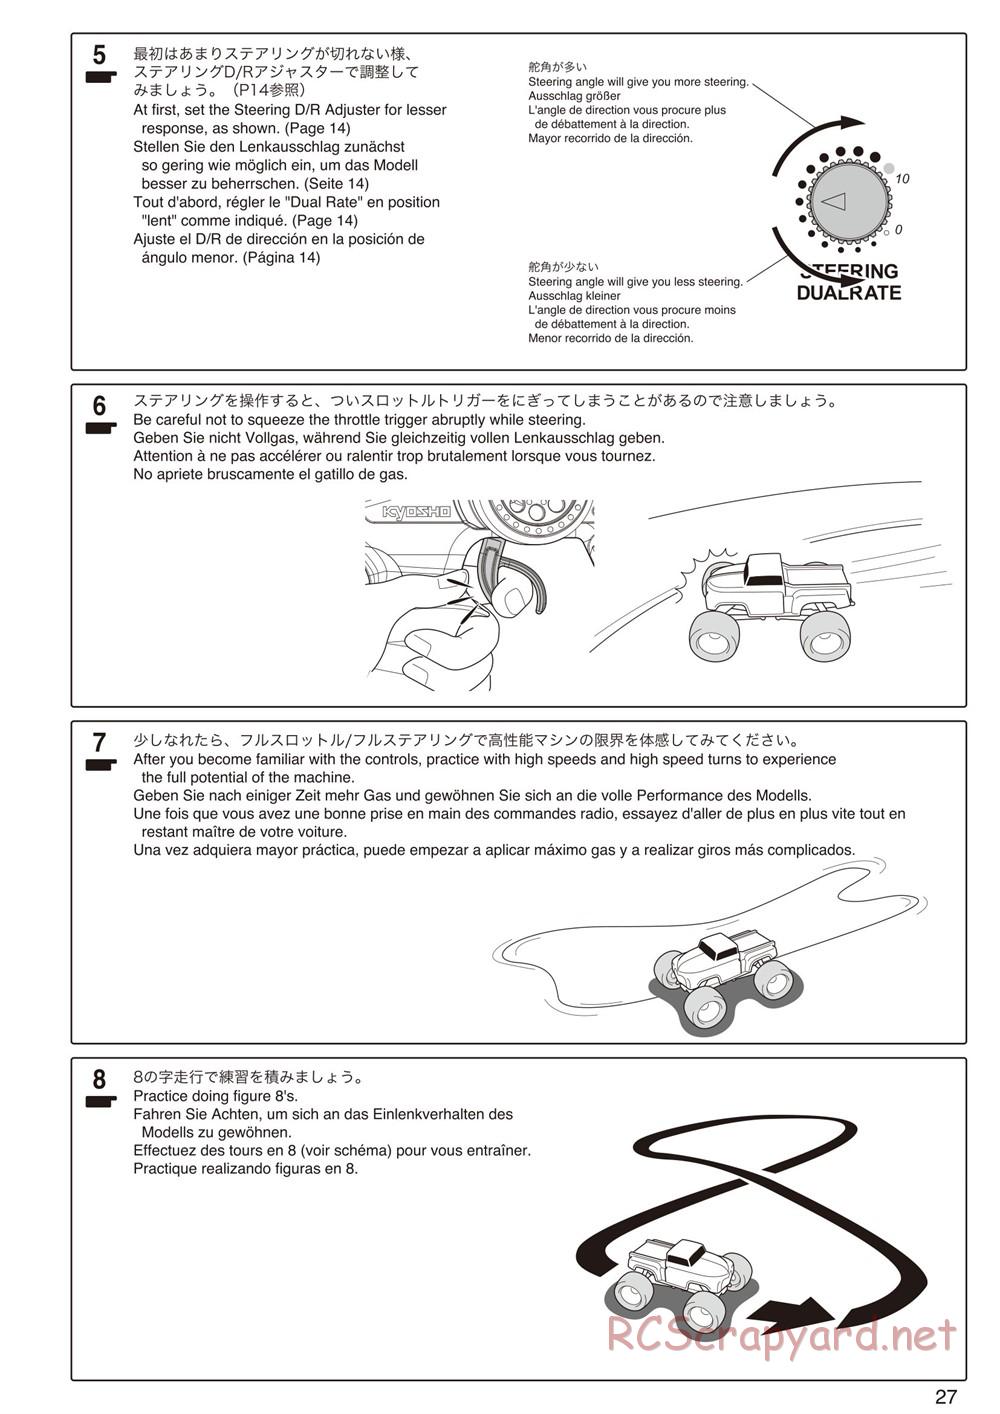 Kyosho - Mad Force Kruiser 2.0 - Manual - Page 27